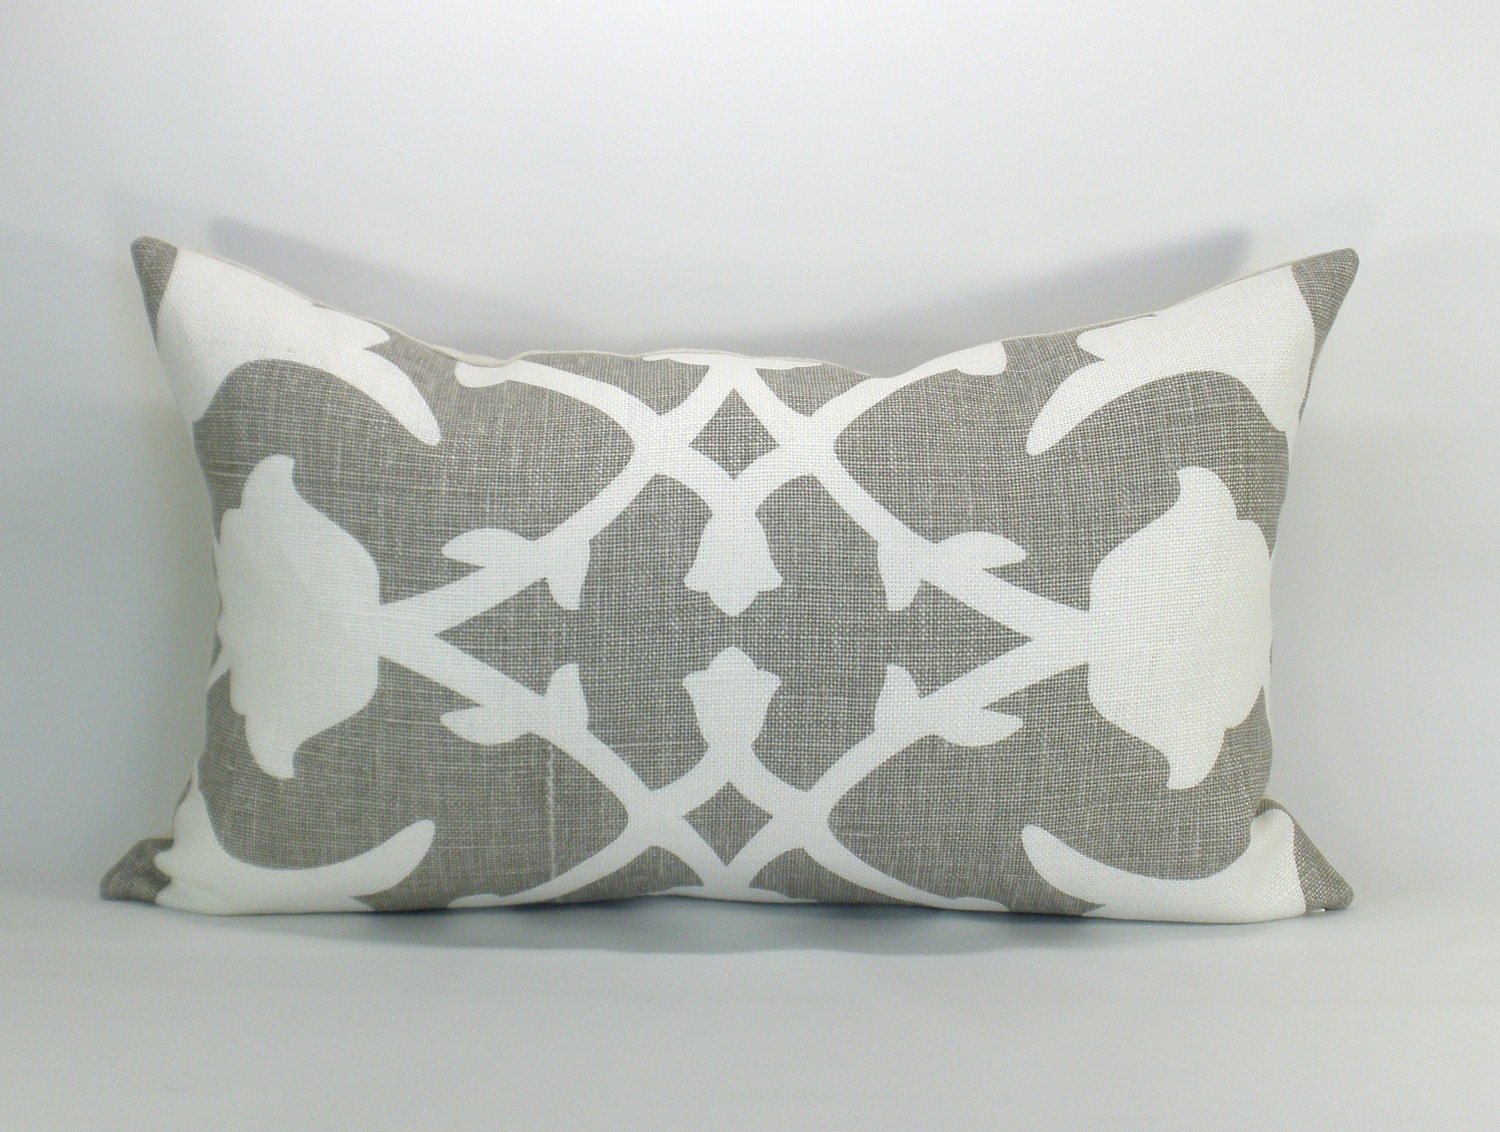 Barbara Barry Poetical pillow cover in Gray - 12 x 20